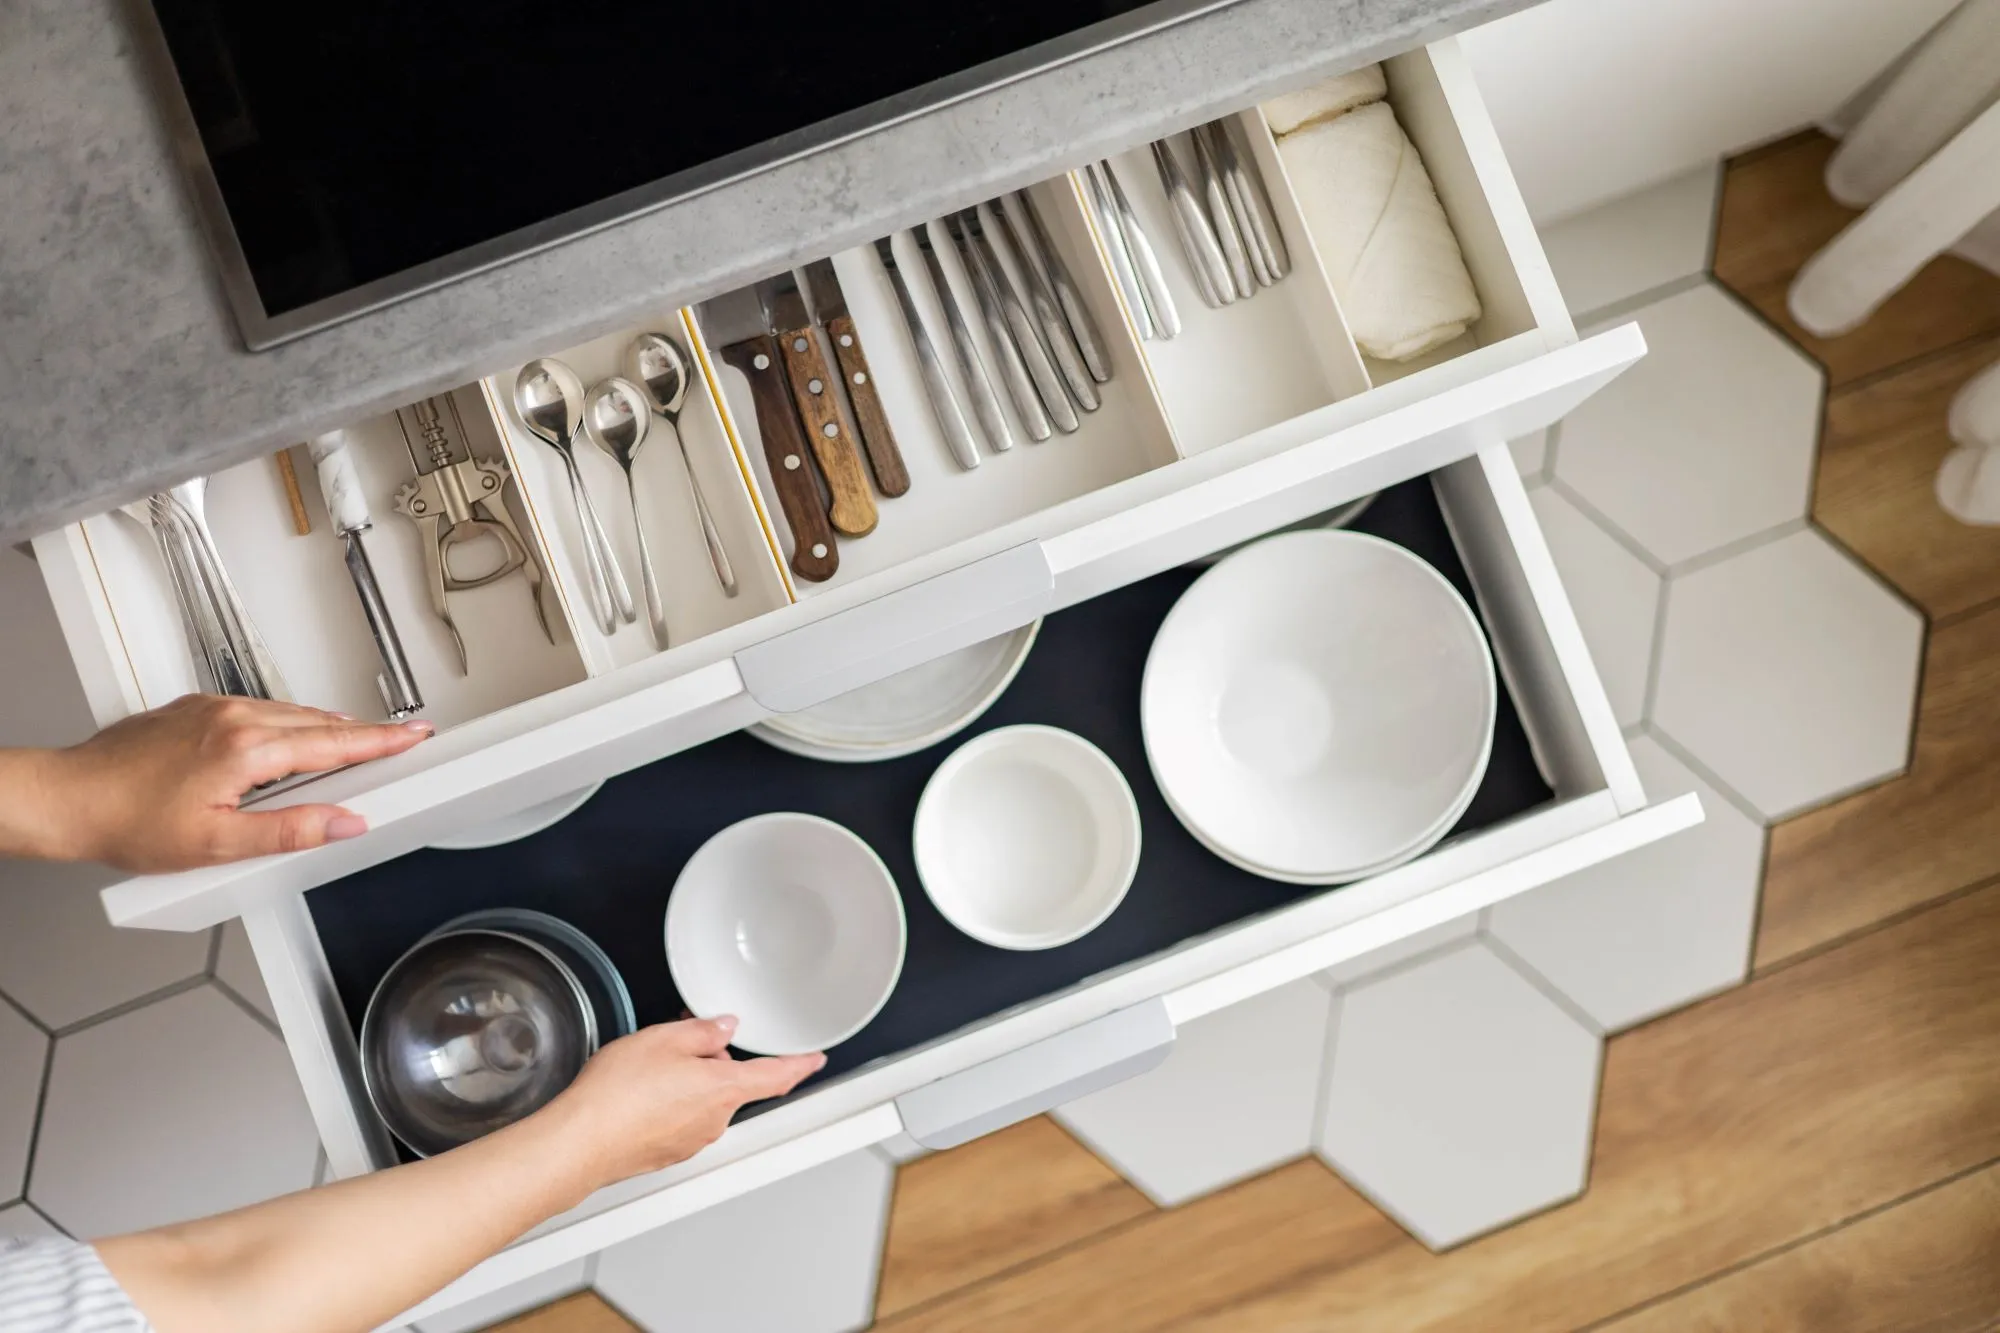 Optimal the storage cabinets space can free up much-needed countertop space and create a more organized and functional kitchen